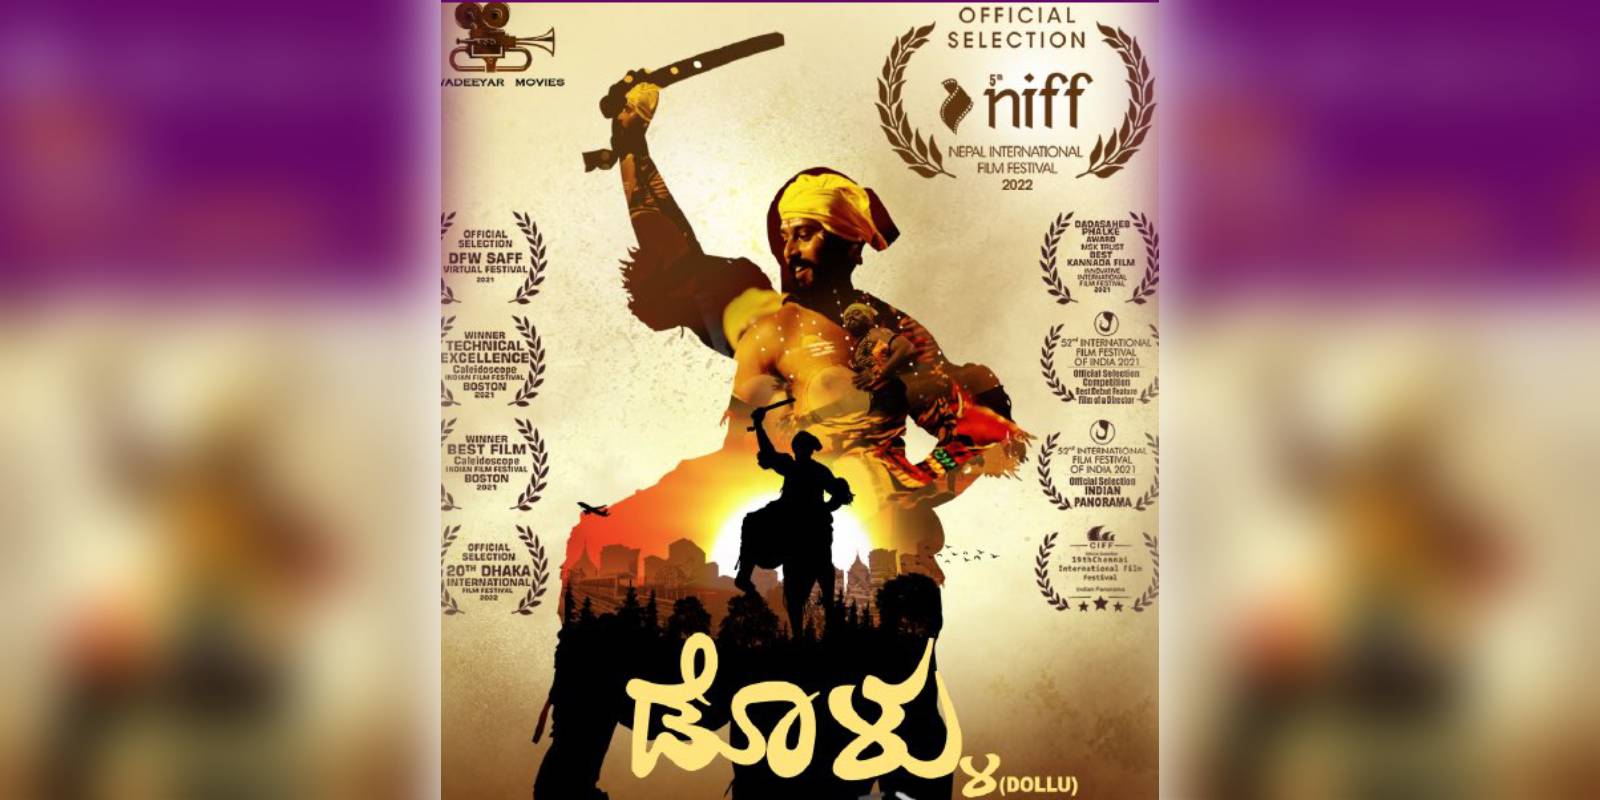 Kannada film 'Dollu' to be screened at the Indian Film Festival in Mexico